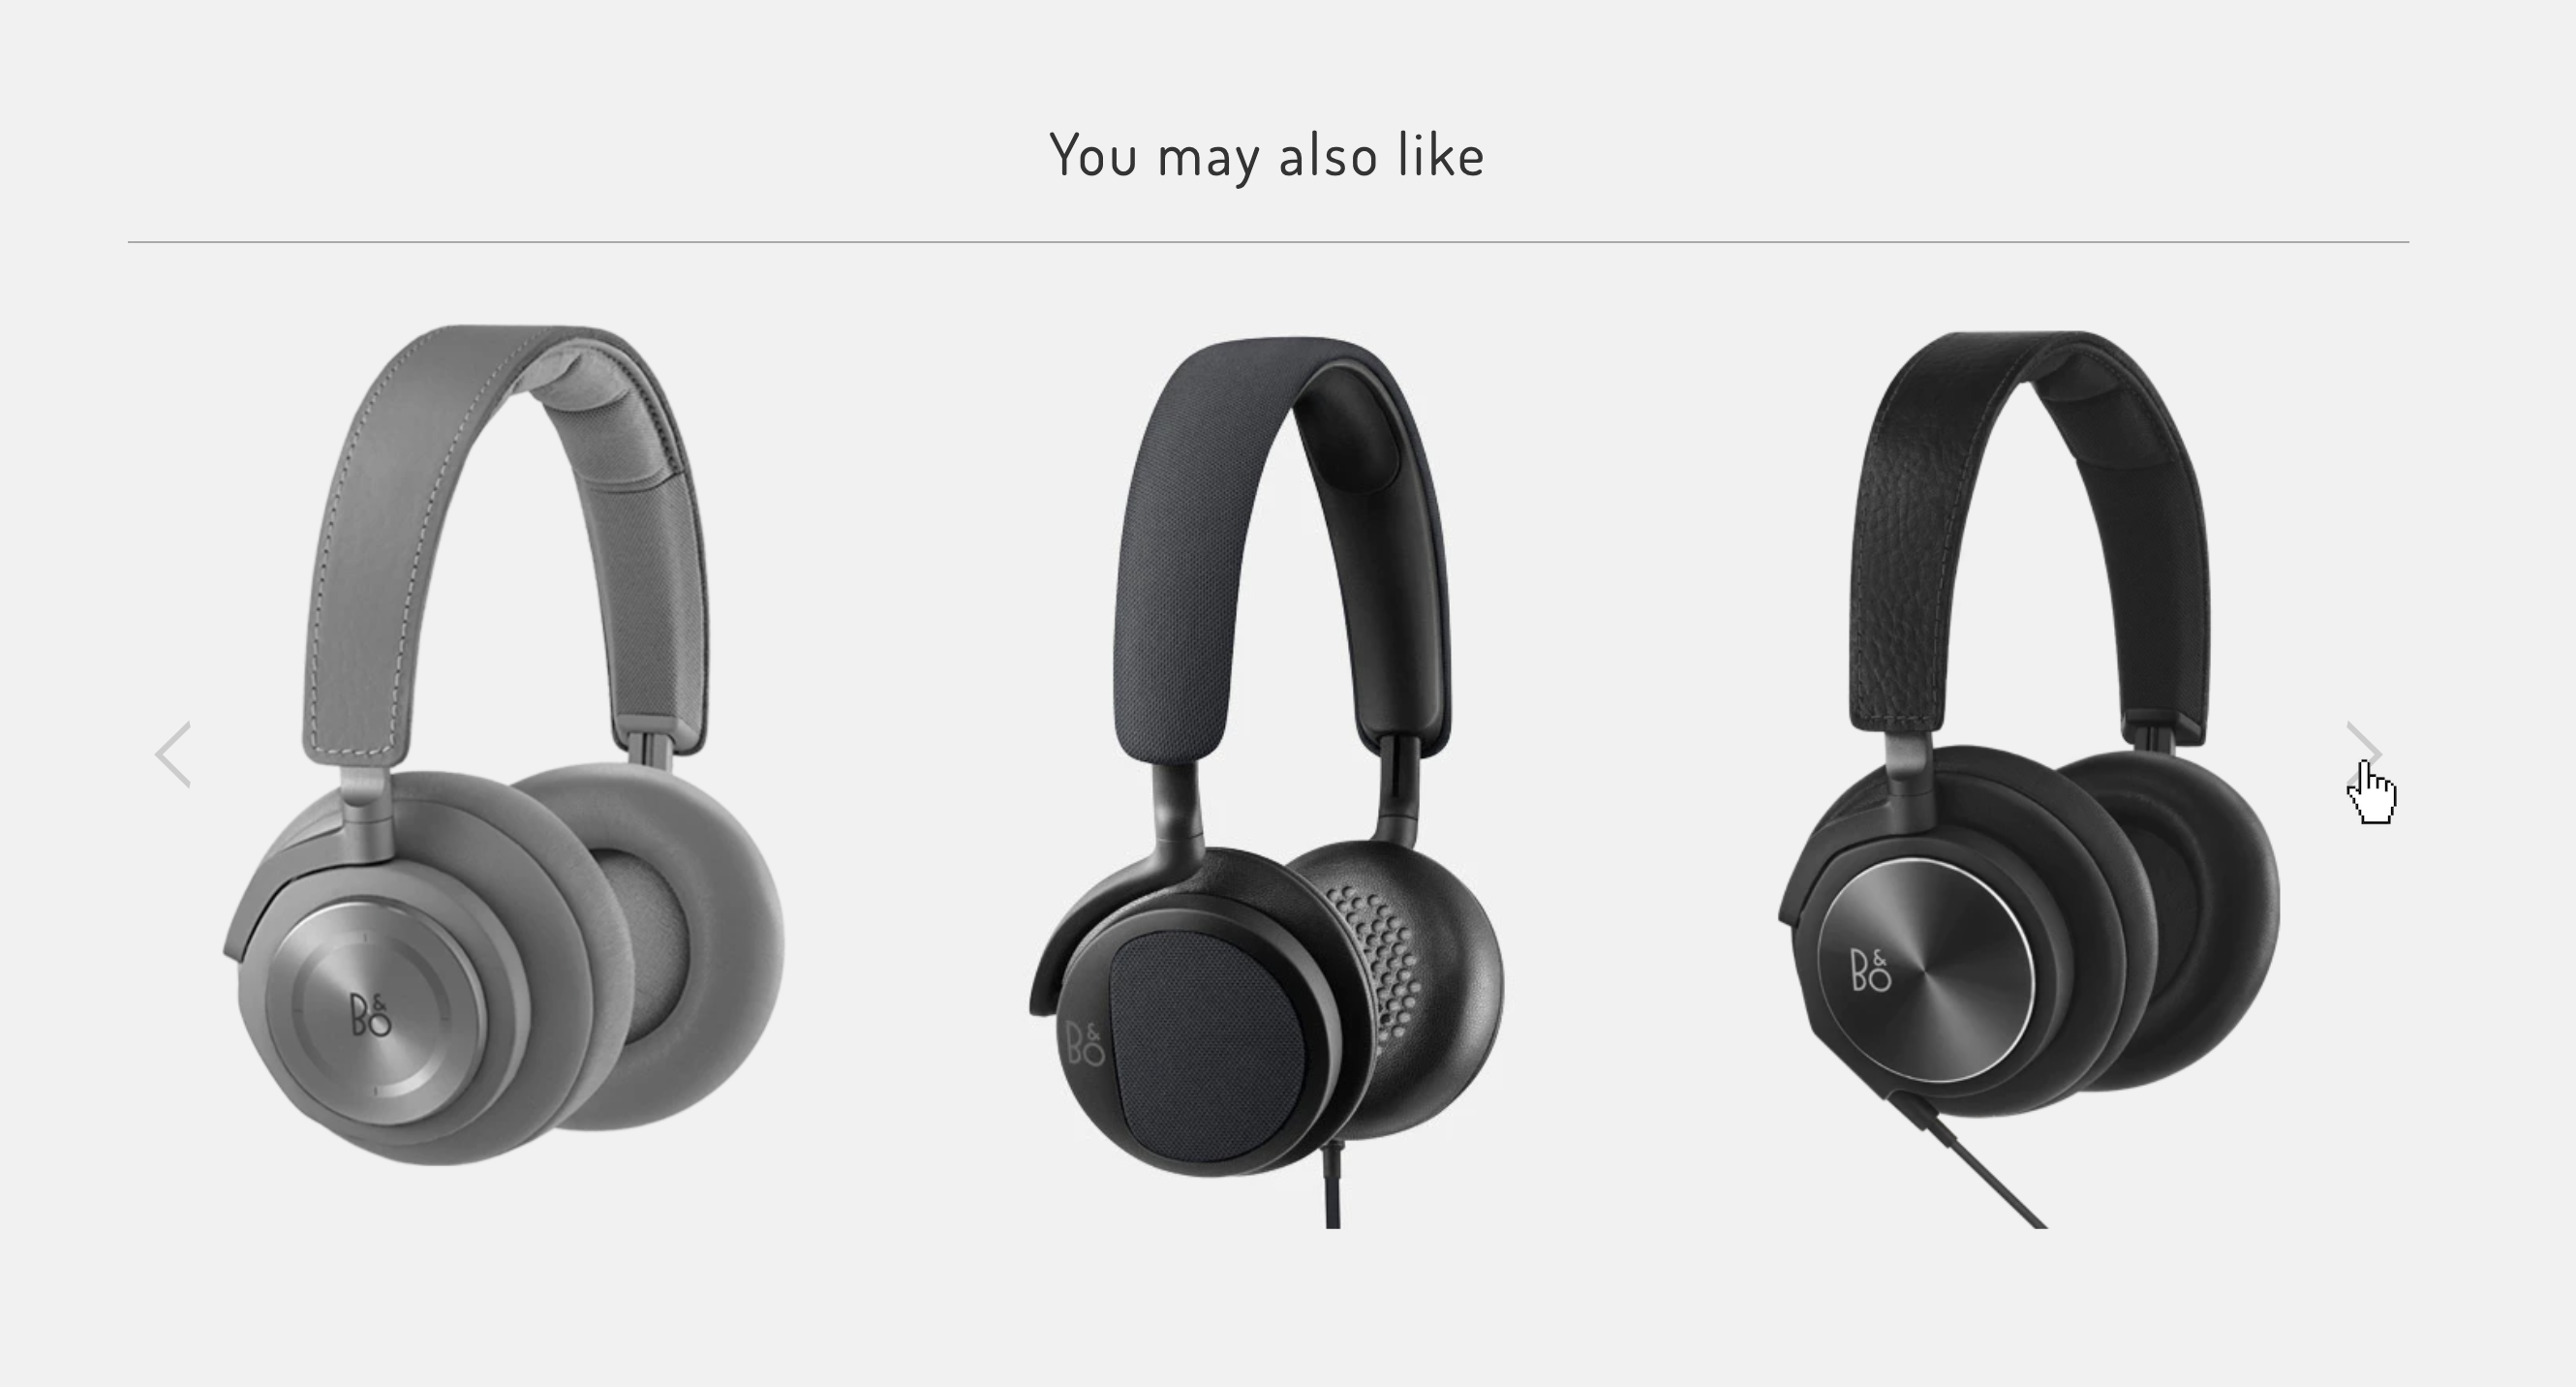 other_headphone_products_suggested_with_slider_option.png